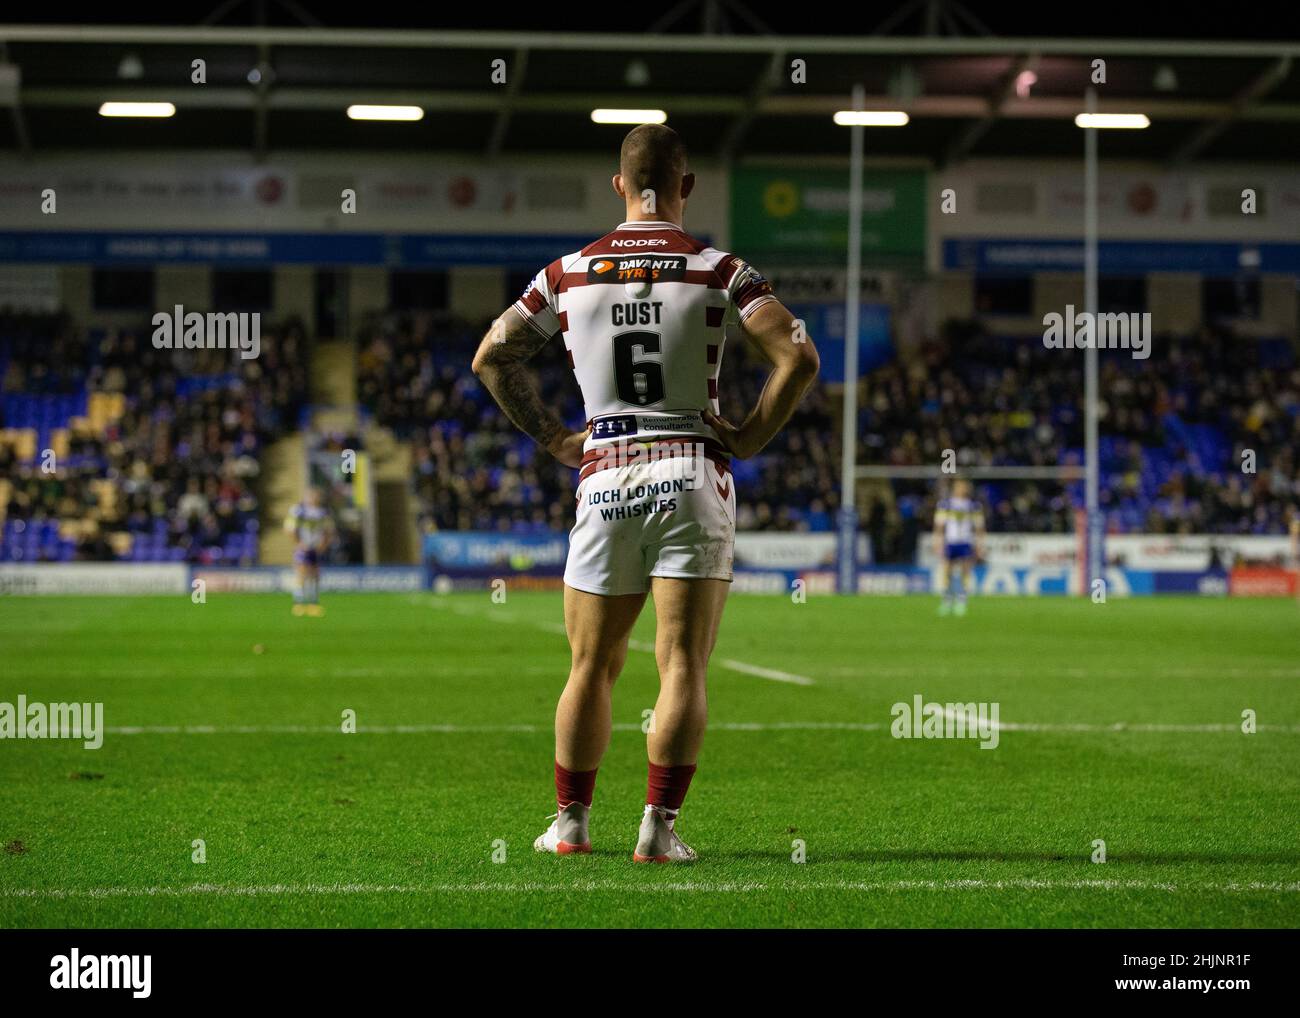 Cade Cust Waiting for kick off against Warrington Wolves Stock Photo